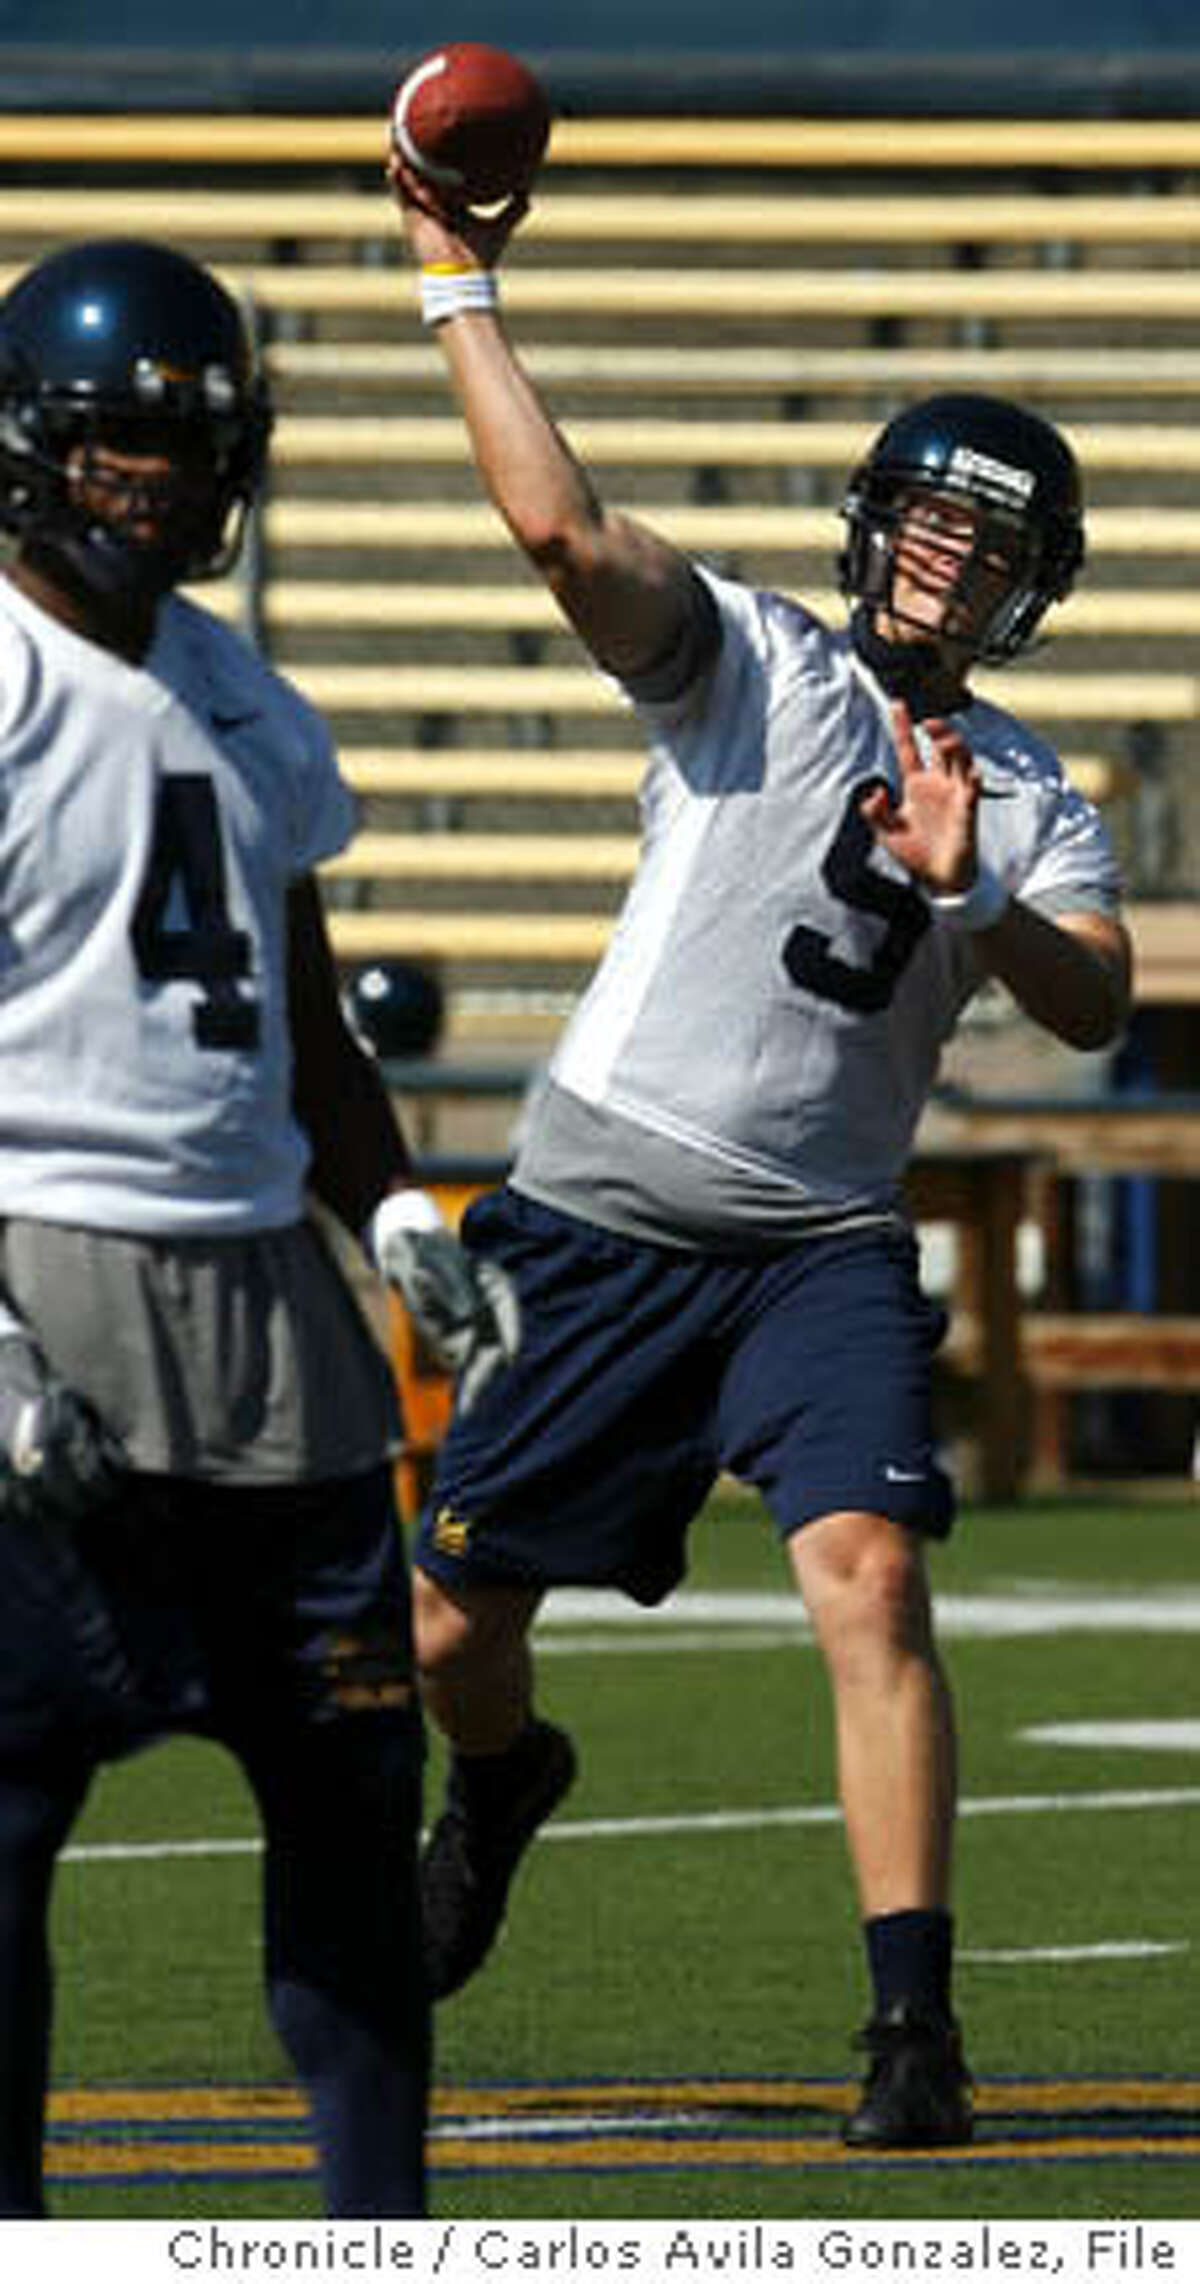 CAL08_117_CAG.JPG Cal quarterback, Nate Longshore, throws during practice. Cal football team practices at Memorial Stadium in Berkeley, Ca., on Monday, August 7, 2006. Photo by Carlos Avila Gonzalez/The San Francisco Chronicle Photo taken on 8/7/06, in Berkeley, Ca, USA **All names cq (source) Ran on: 08-08-2006 Caryn Marlowe (left) and Jessica Vanderhoof in Il Matrimonio Segreto. Ran on: 08-08-2006 Nate Longshore launches a pass during Mondays practice. He tops the depth chart of four quarterbacks. Ran on: 08-08-2006 Ran on: 08-08-2006 Caryn Marlowe (left) and Jessica Vanderhoof in Il Matrimonio Segreto. Ran on: 08-08-2006 Nate Longshore launches a pass during Mondays practice. He tops the depth chart of four quarterbacks.